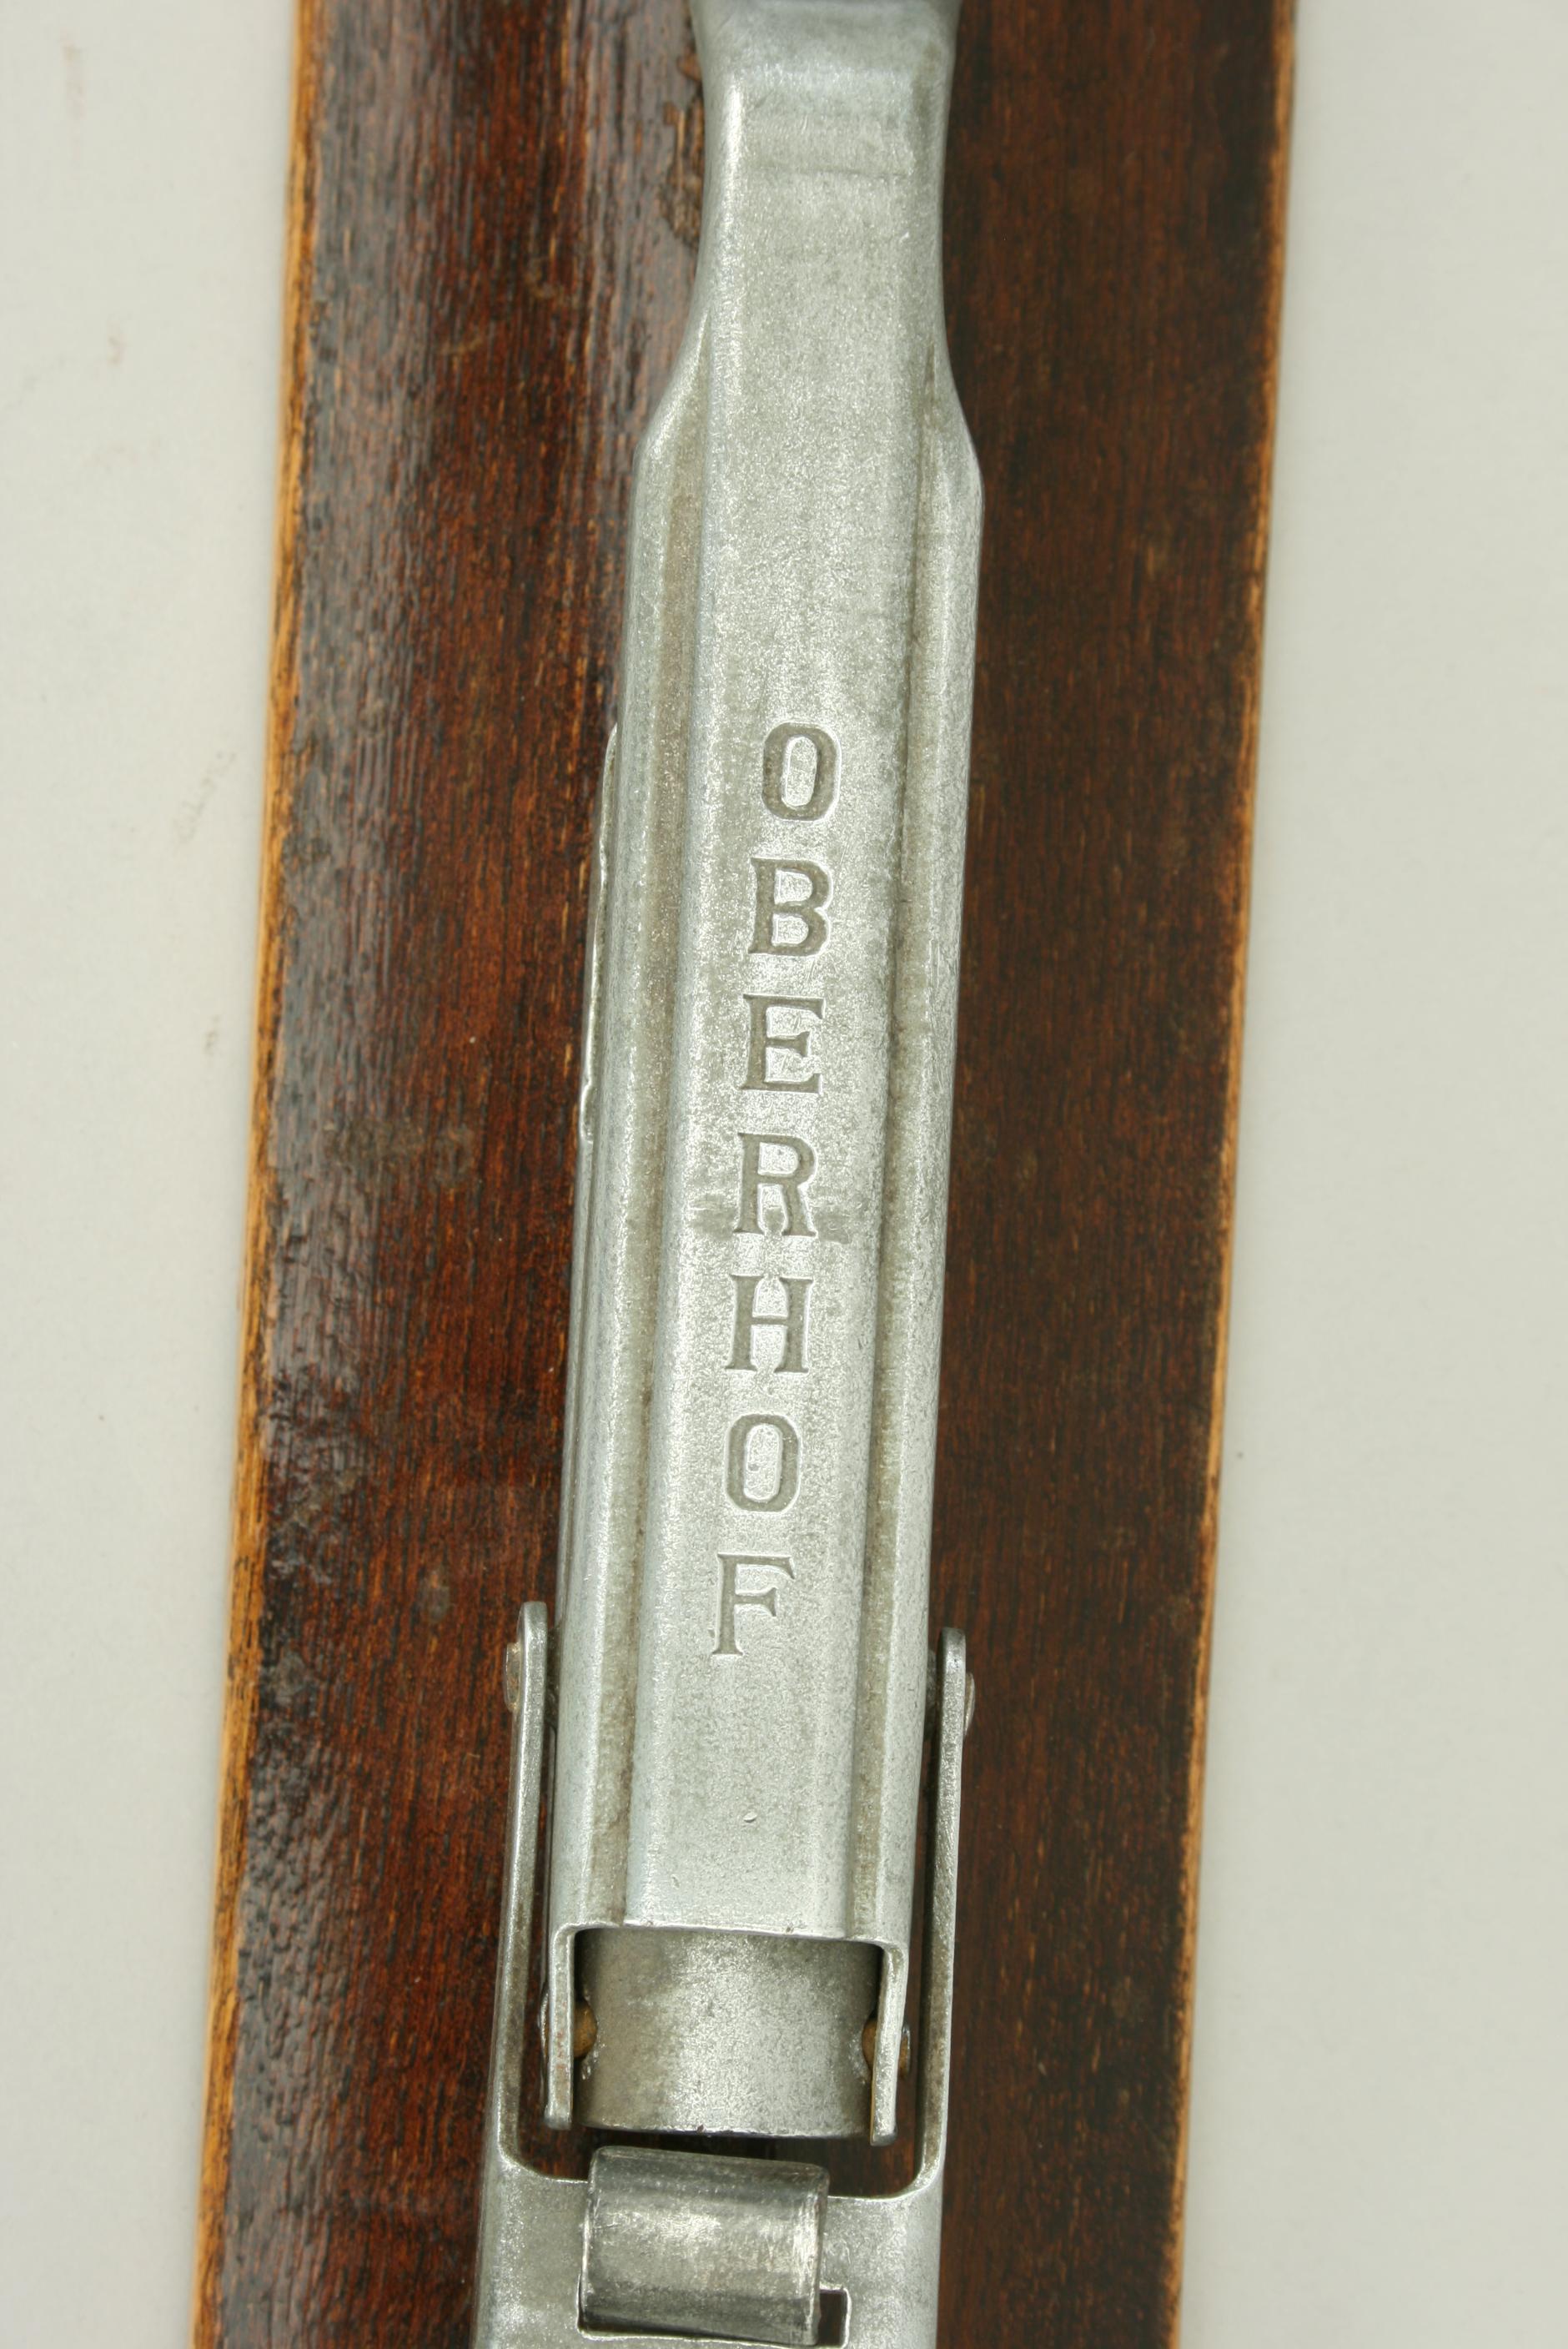 Antique Ash Skis with Unique Oberhof Safety Bindings, Telemark Museum piece. 1